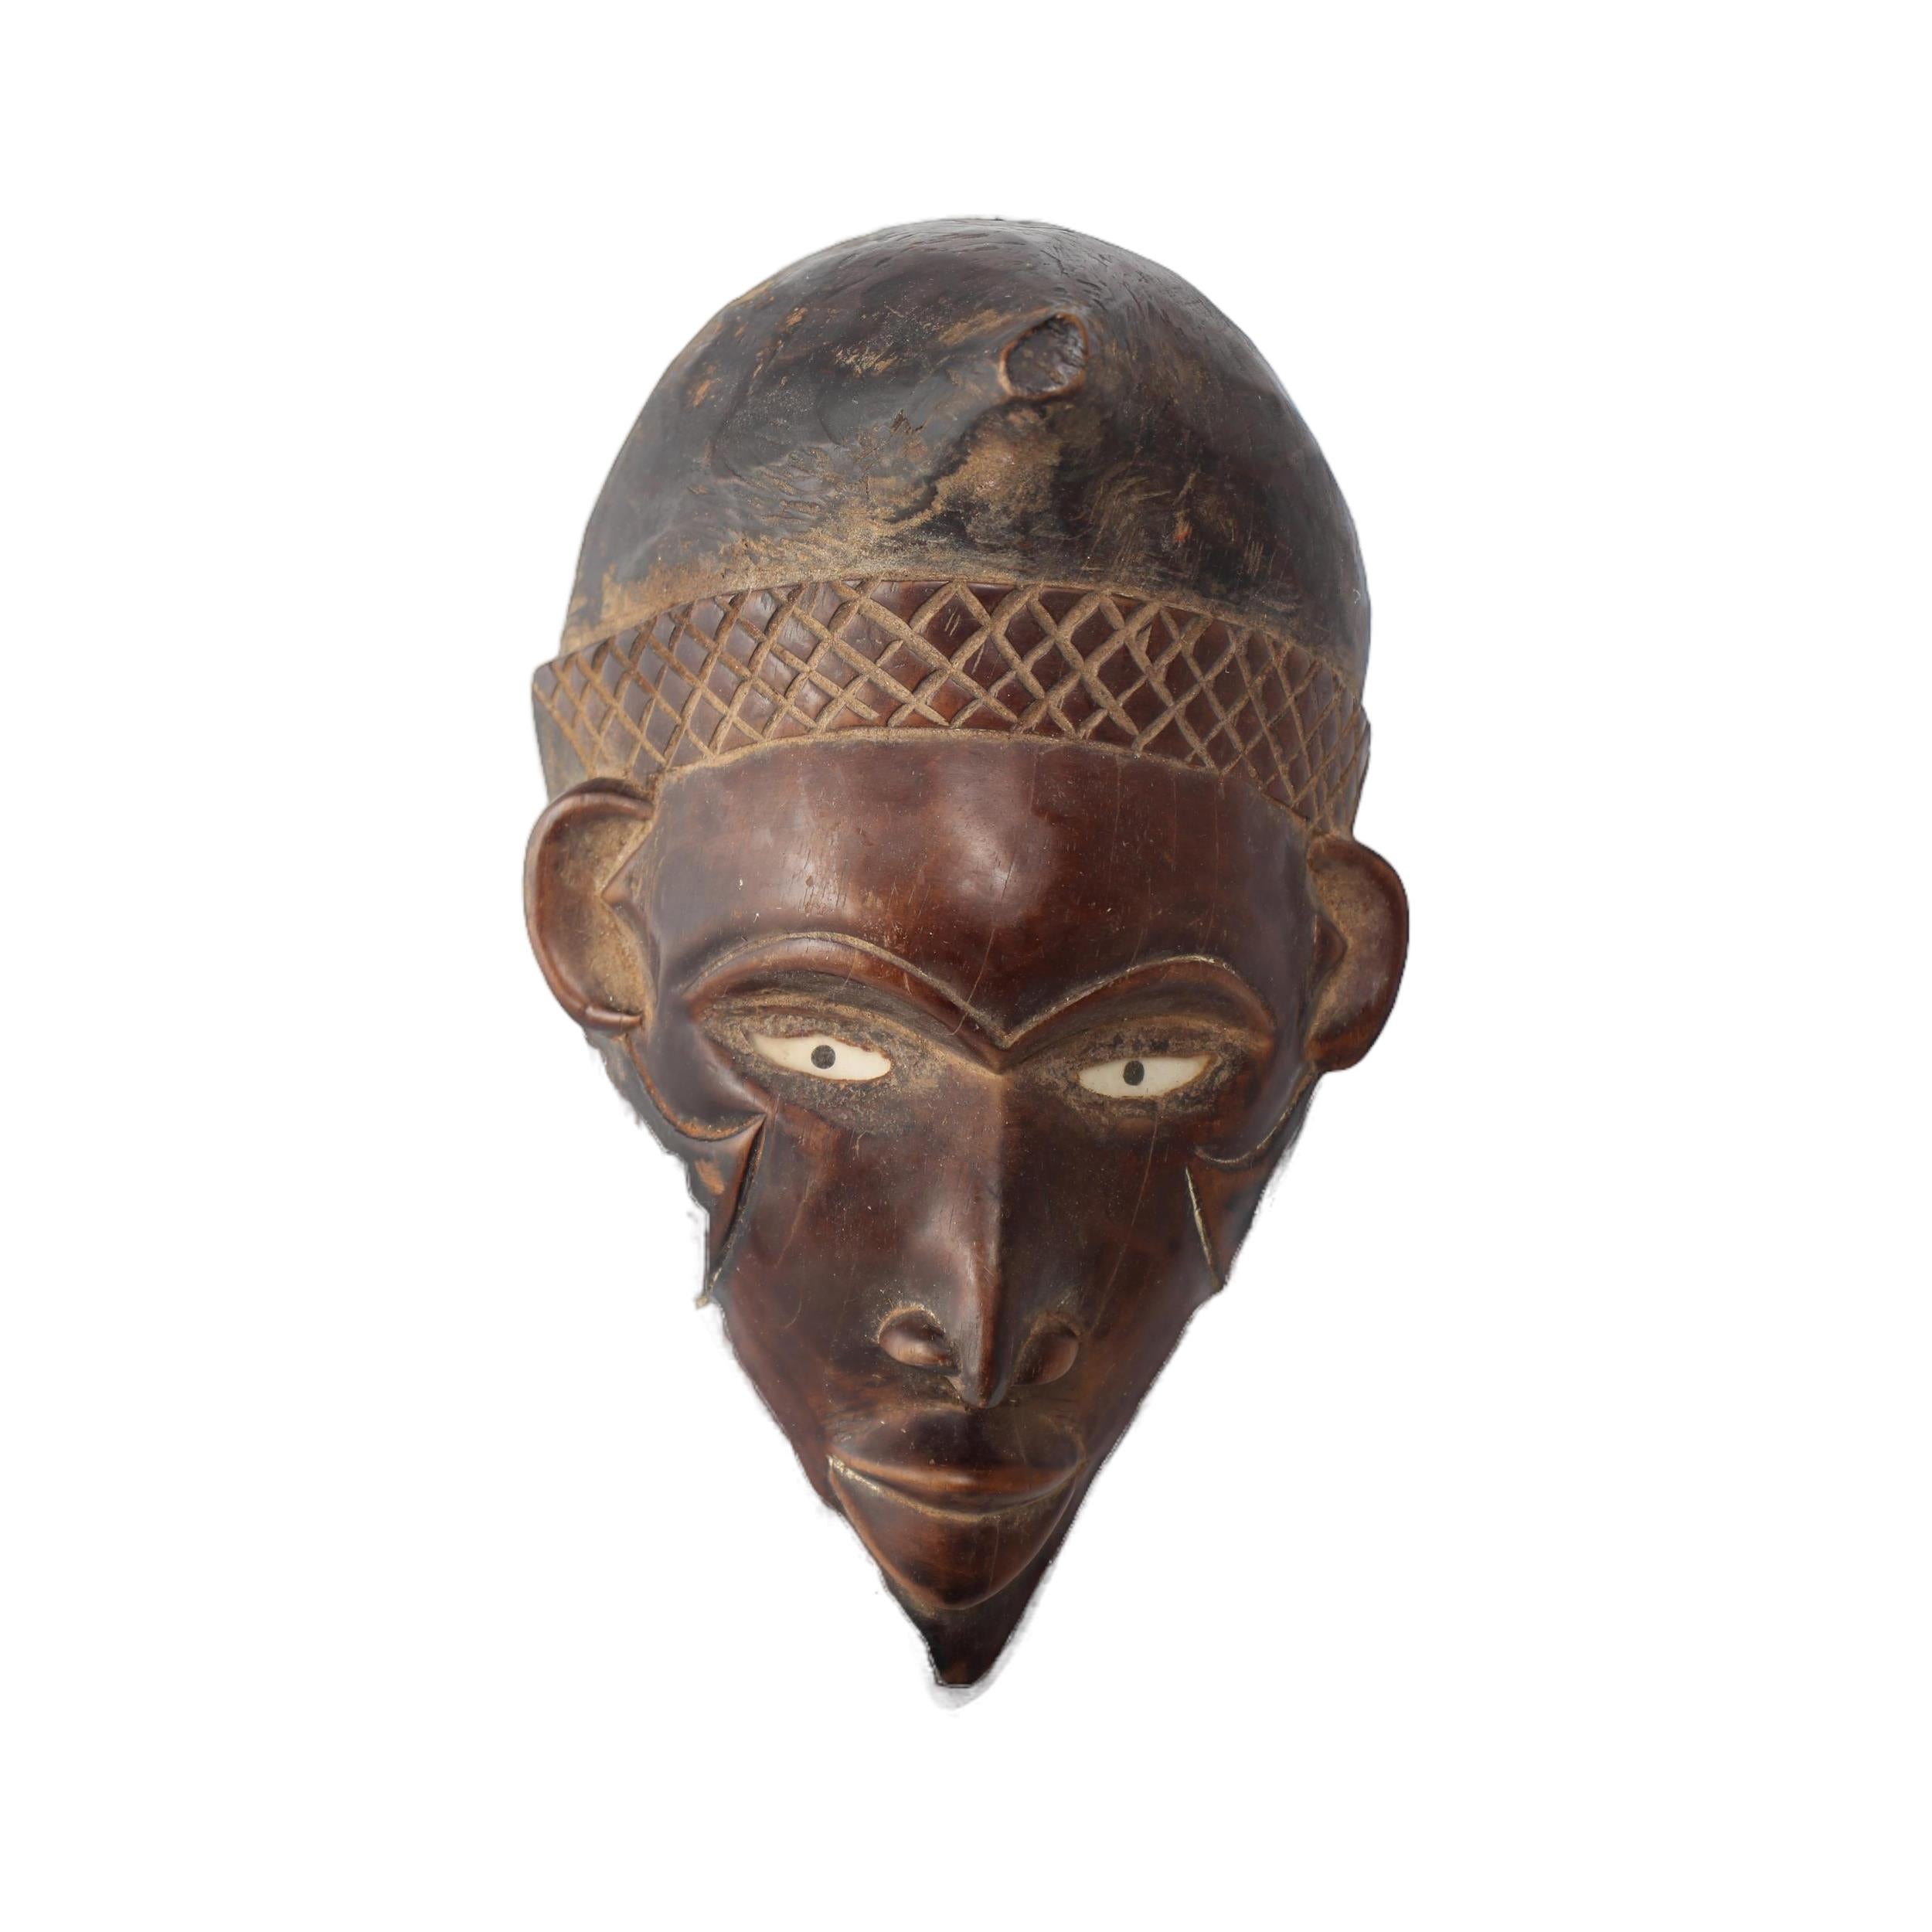 Pende Tribe Mask ~9.4" Tall - Mask